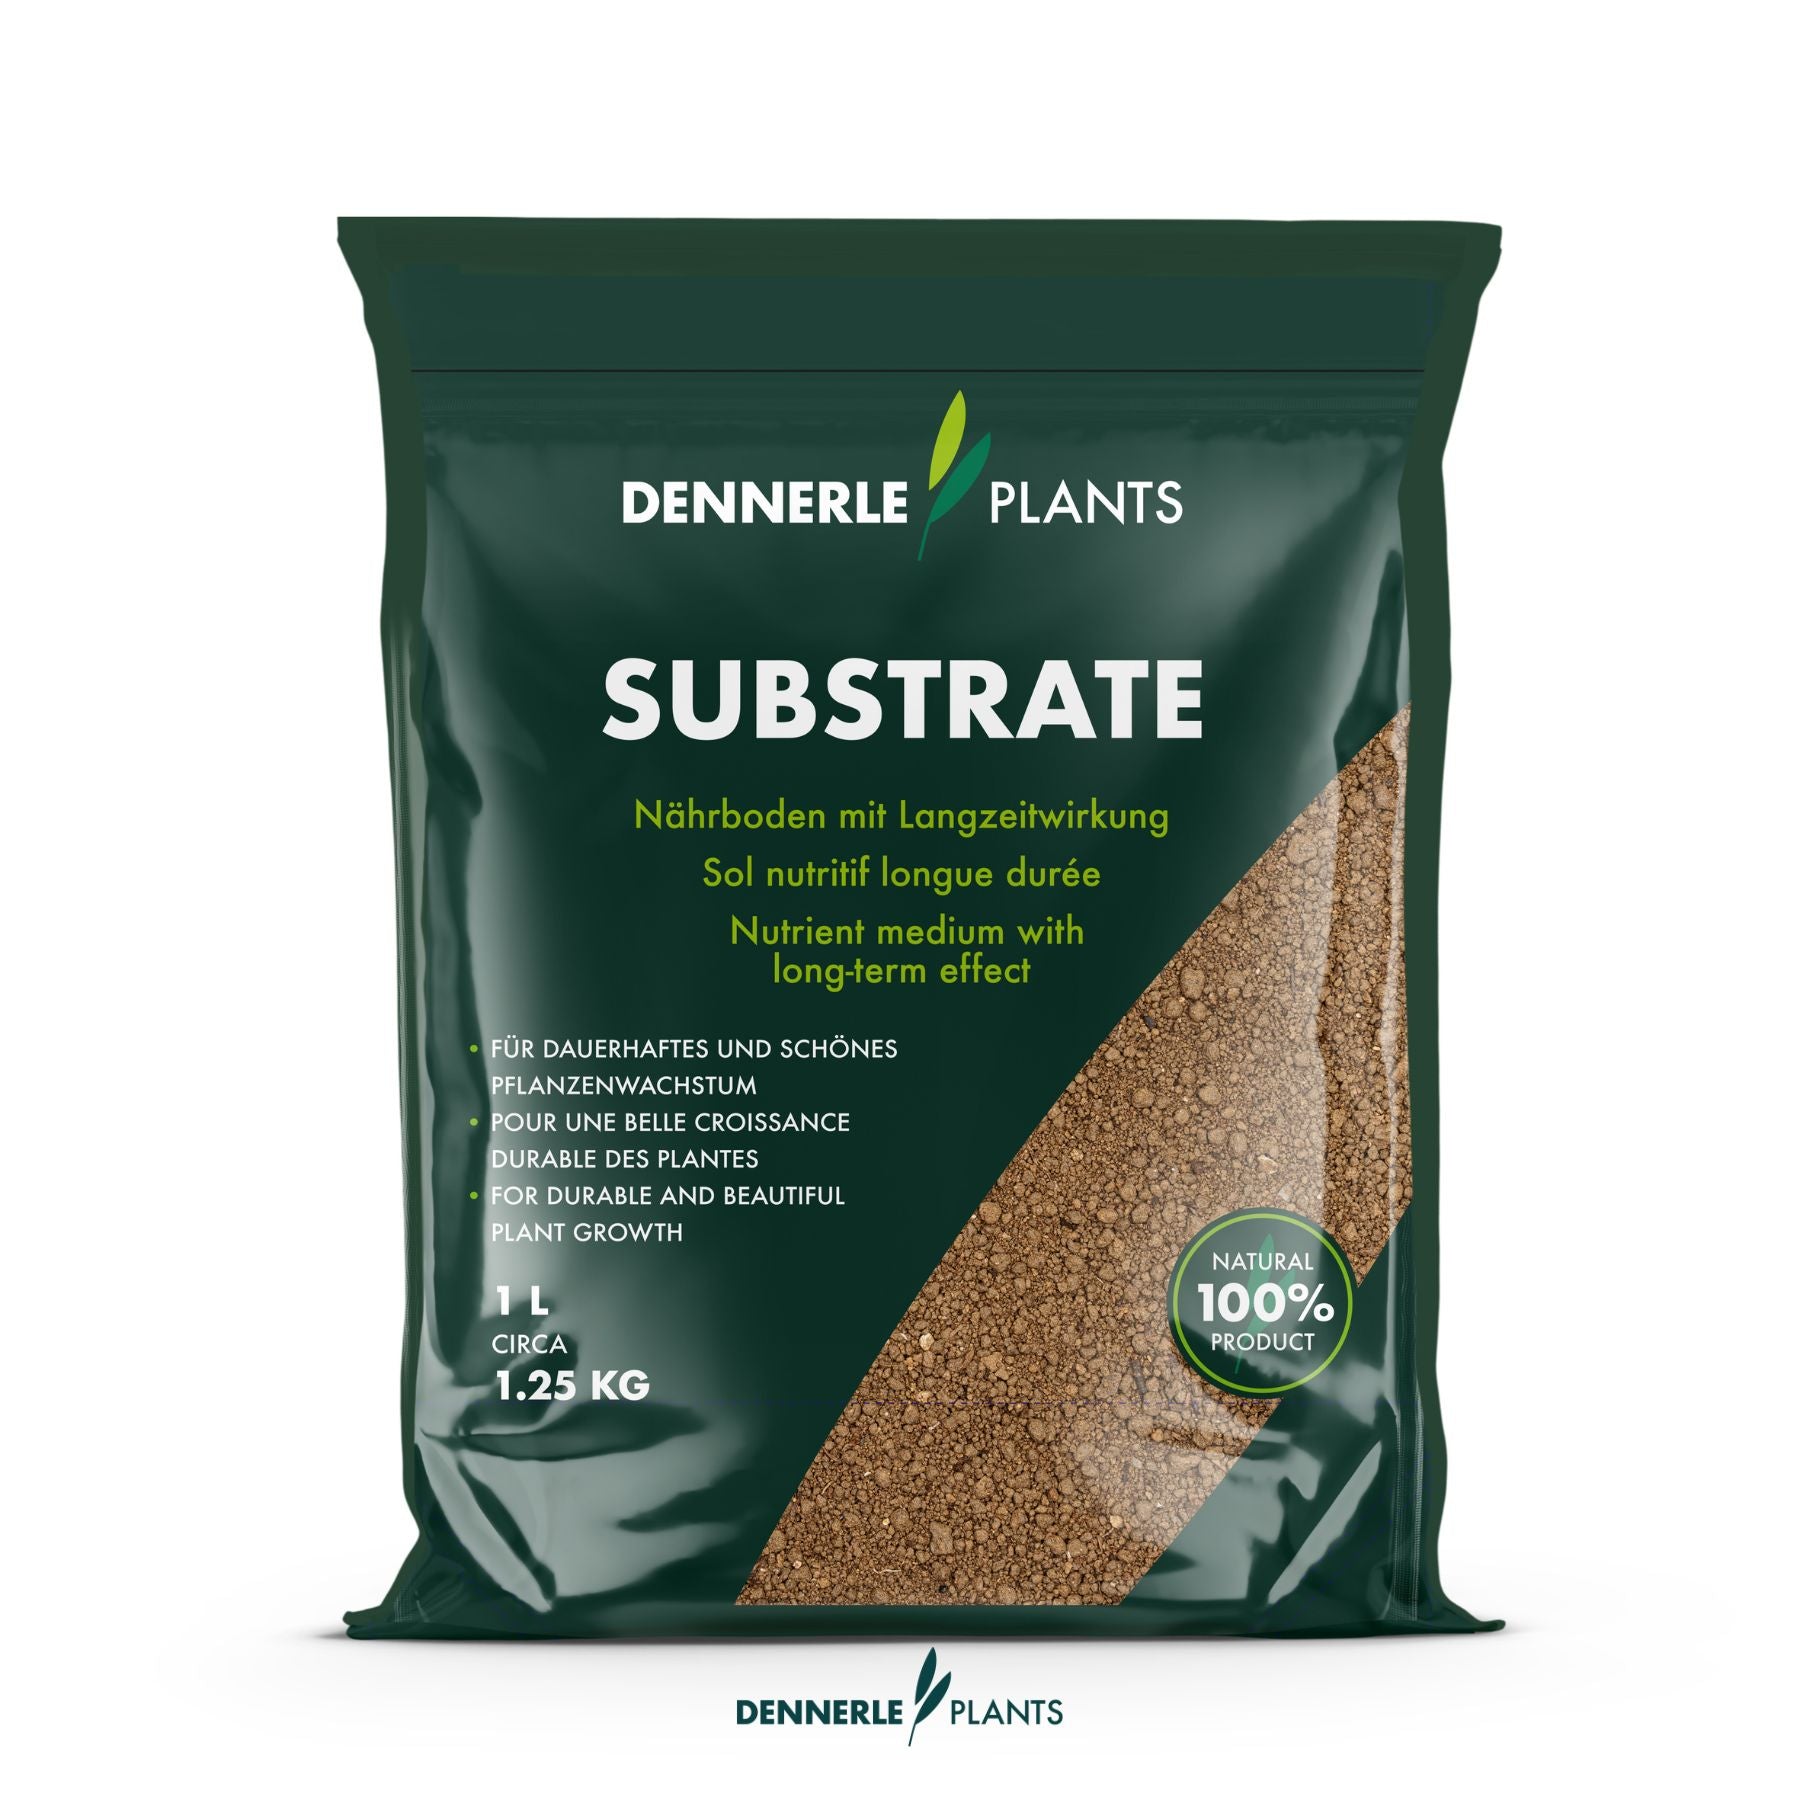 Product picture of Dennerle plants substrate 1 liter